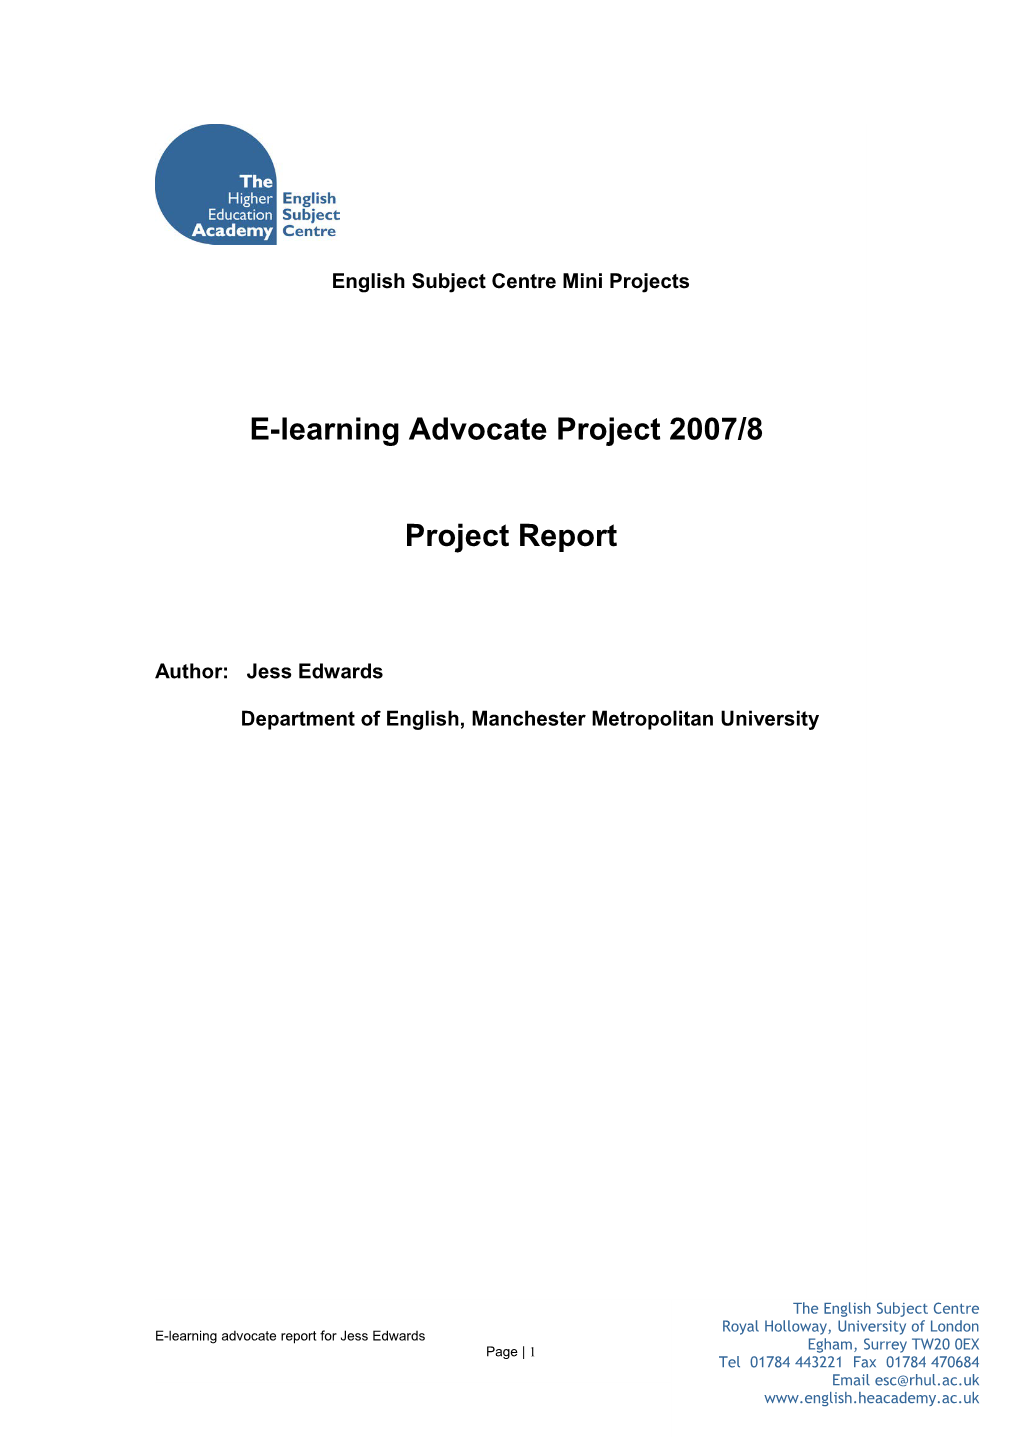 E-Learning Advocate Project Report